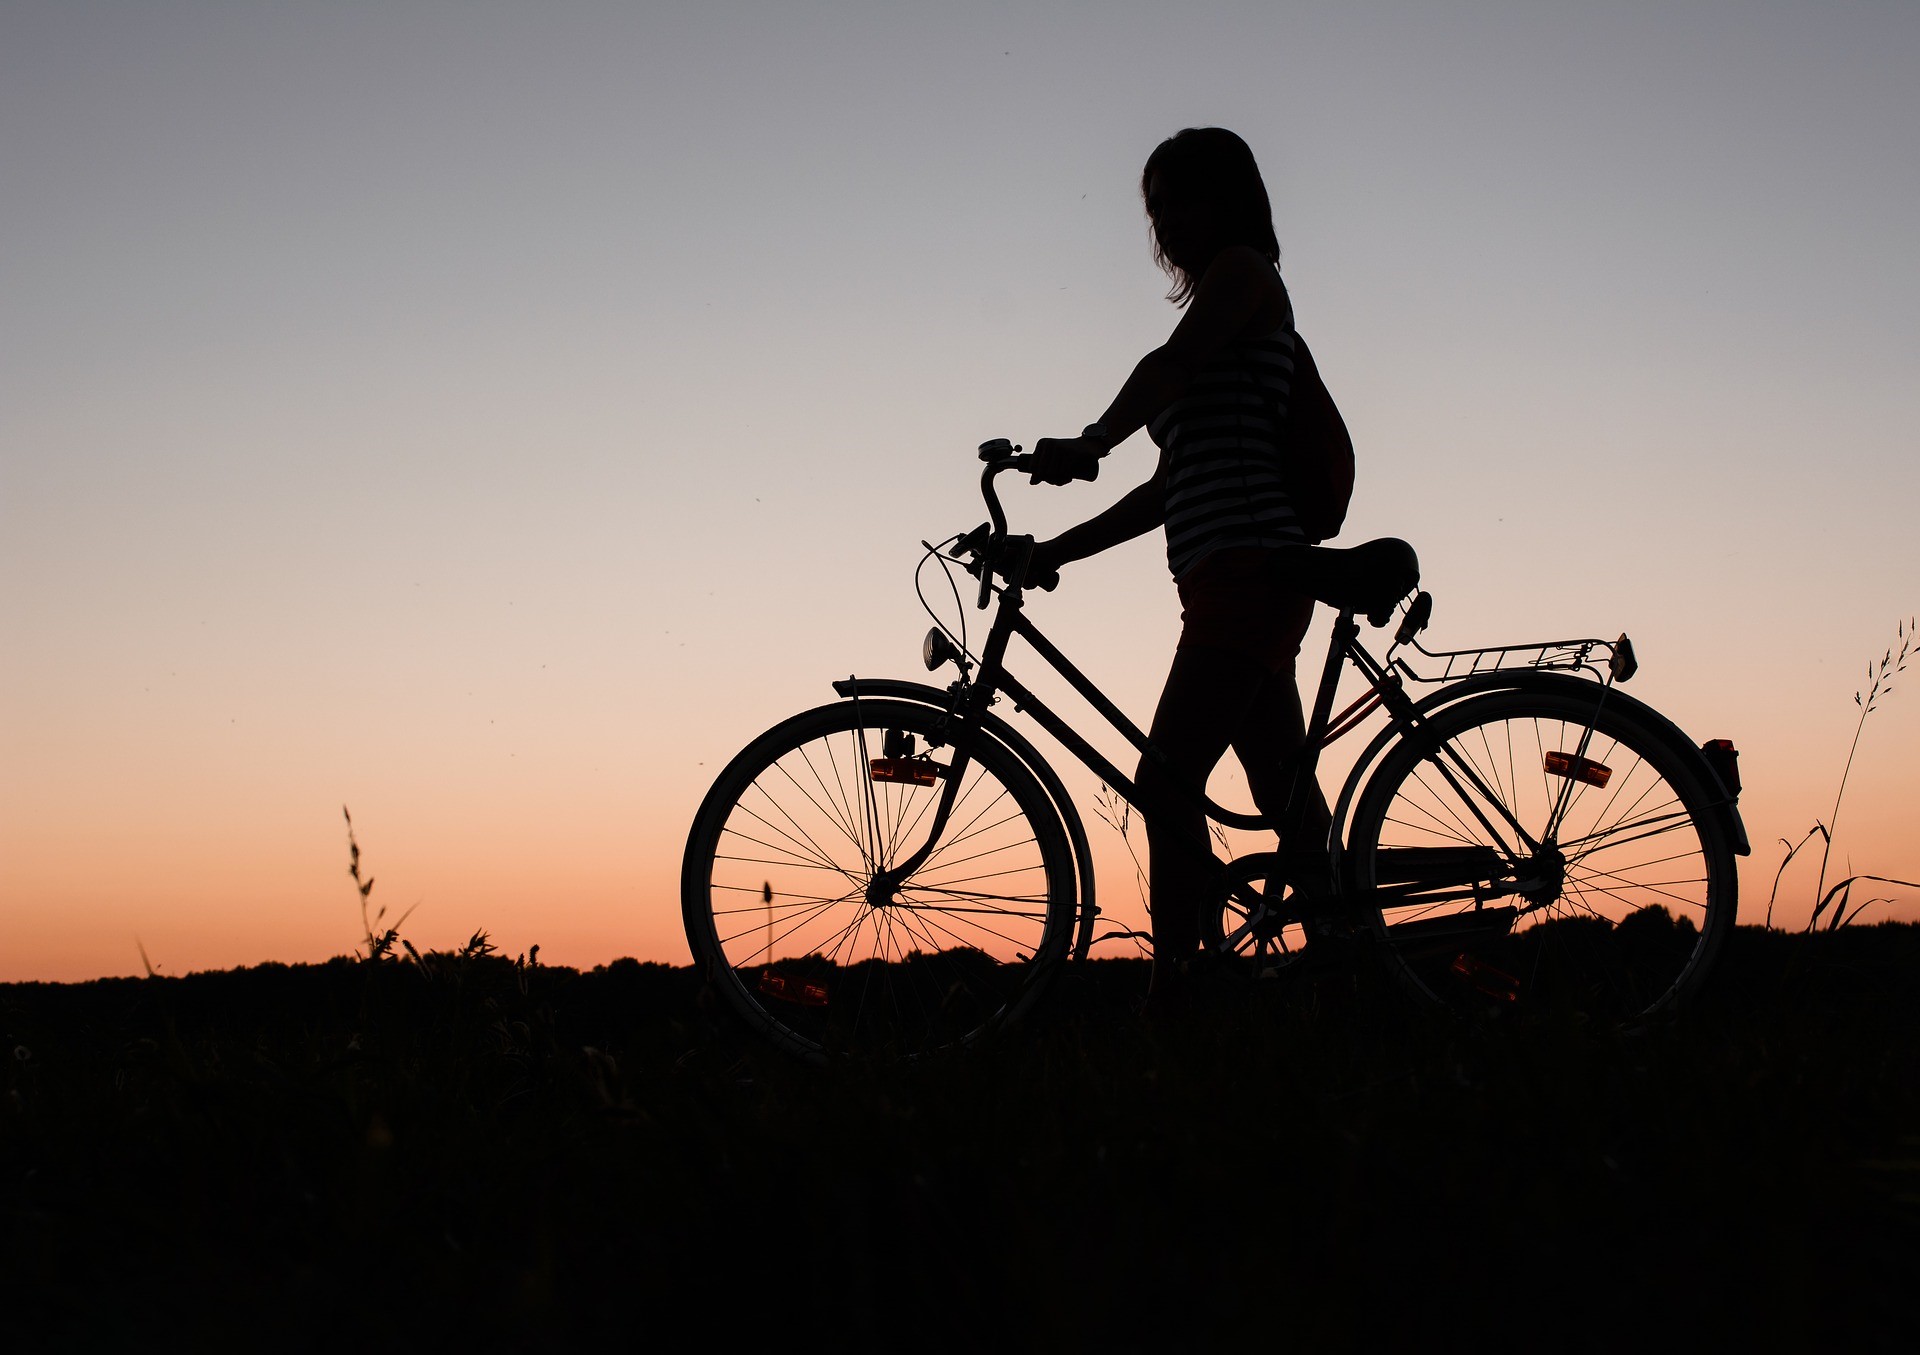 Sunset Trip With Bicycle